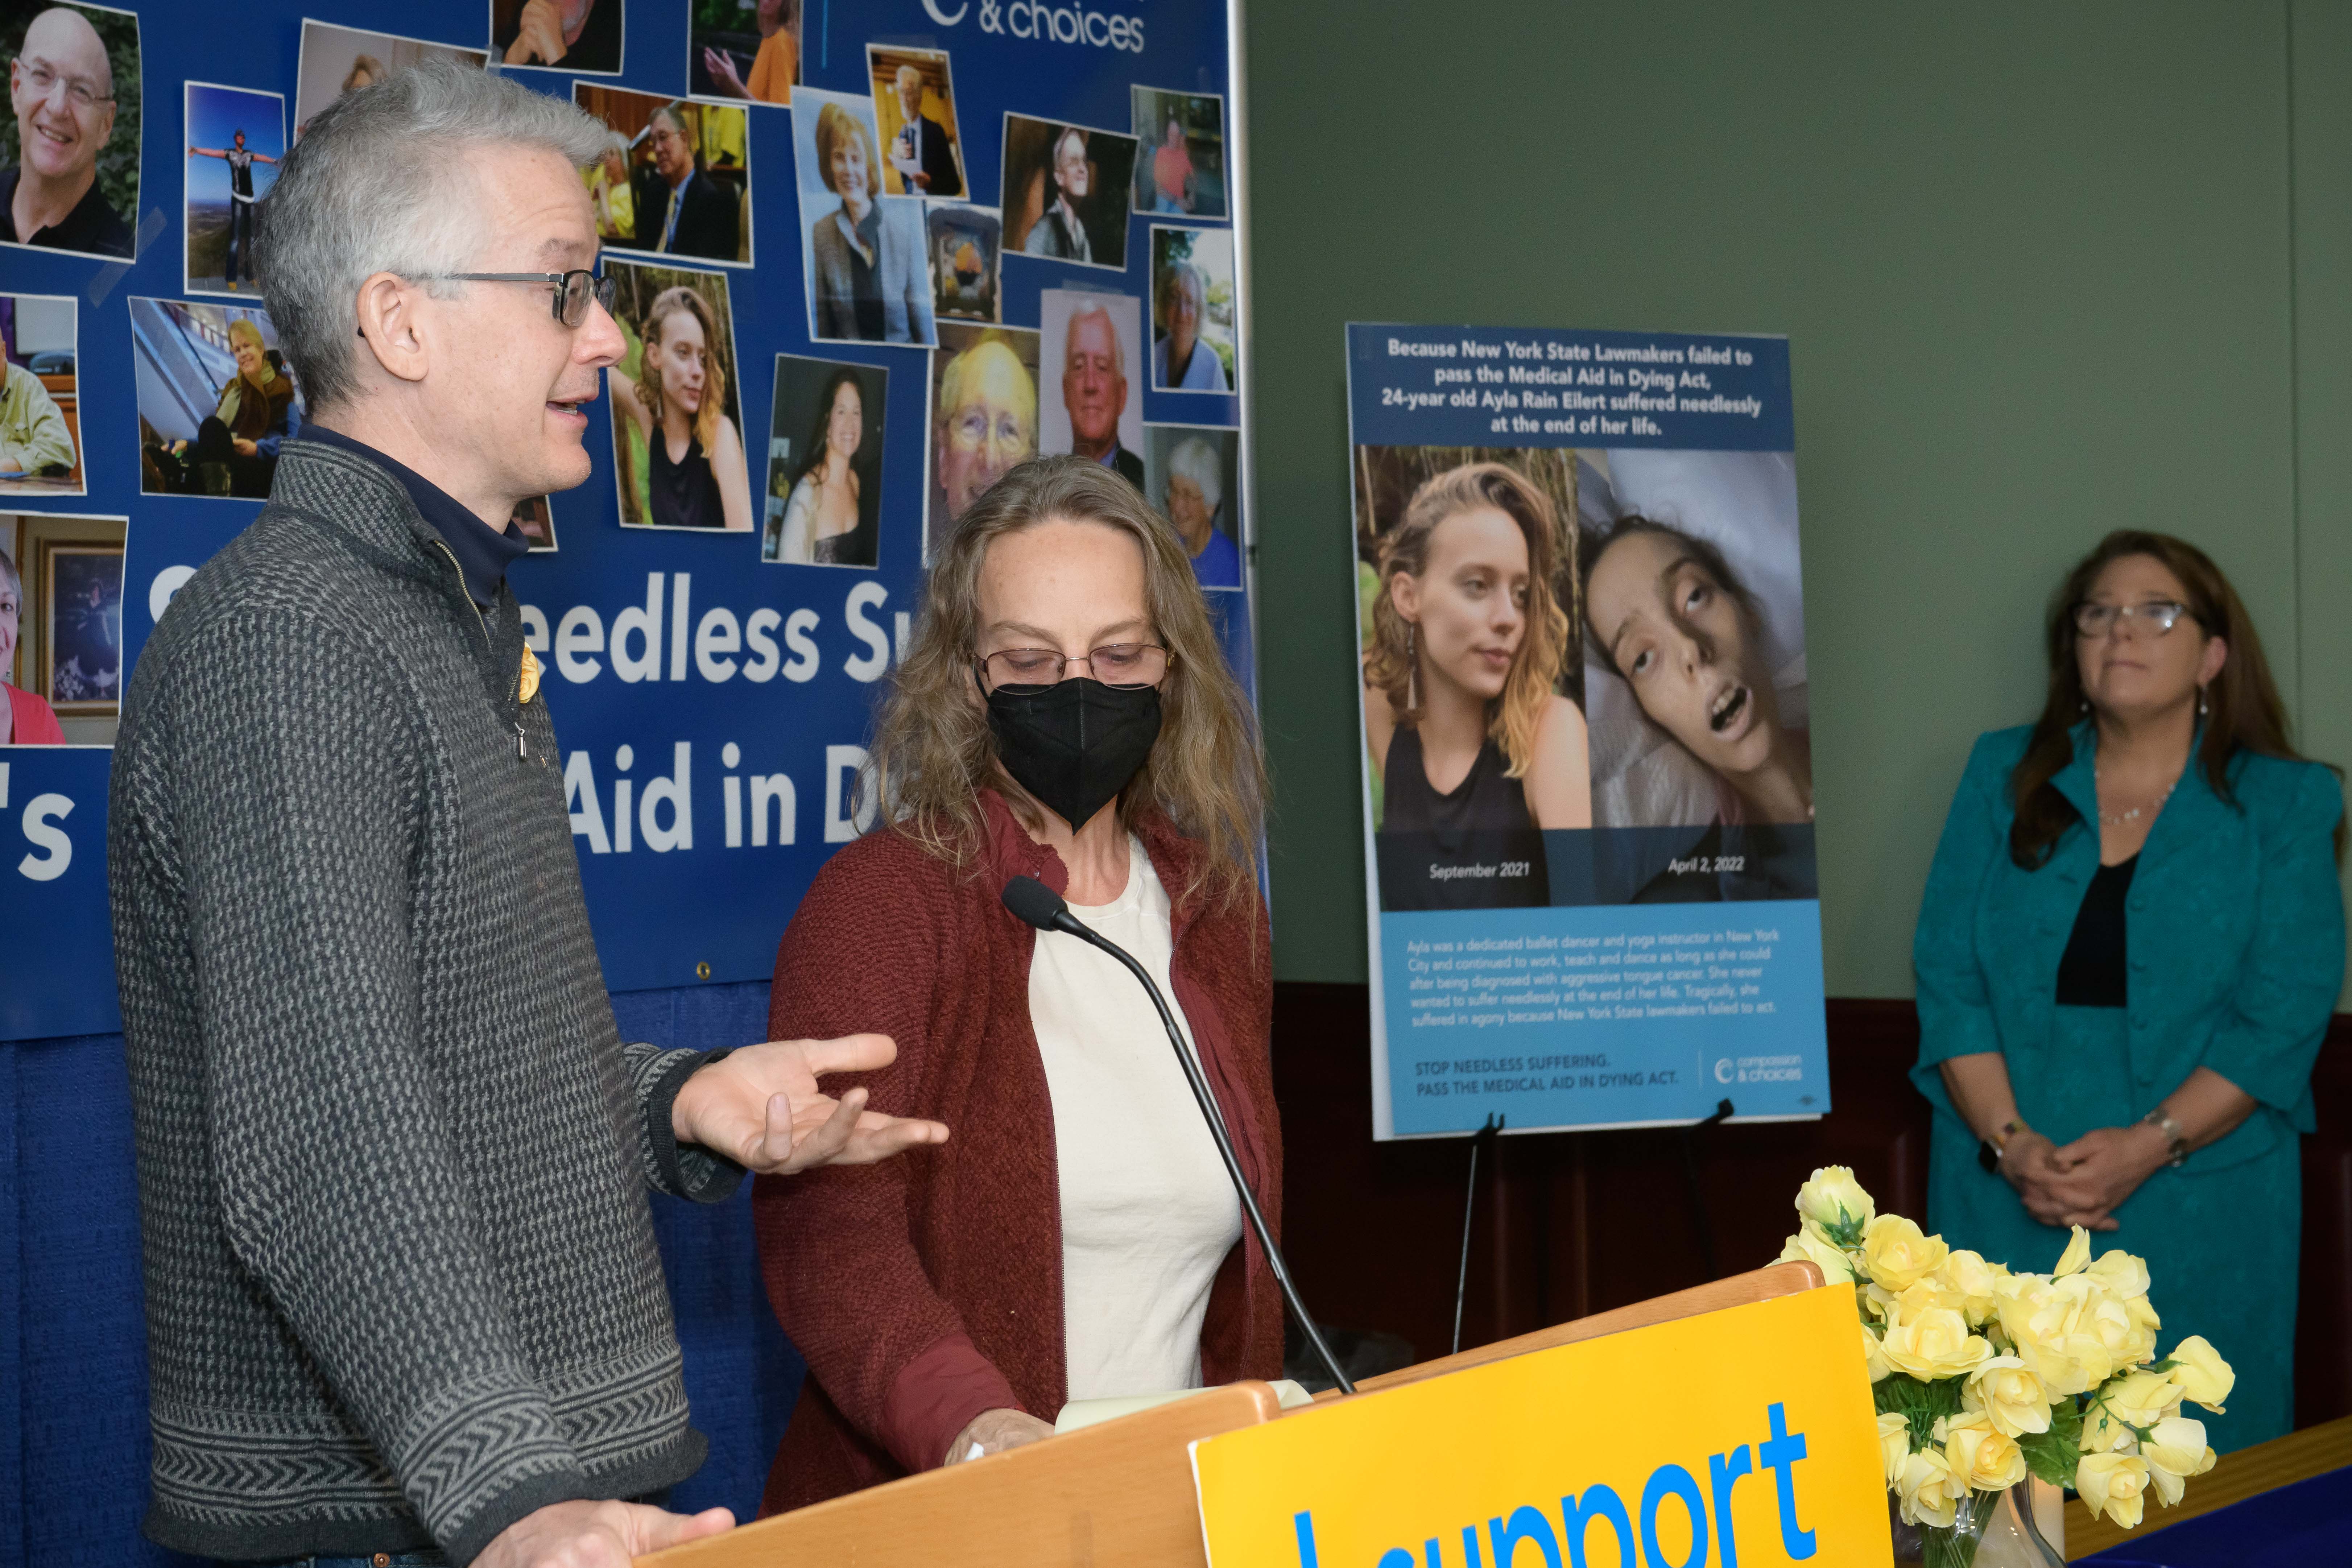 From left, Daren Eilert and Amy Eilert, addressing supporters and press in Albany. At far right, Compassion & Choices New York Senior Campaign Director Corinne Carey stands next to a poster with images of Ayla Rain Eilert, who died of tounge cancer on April 2, 2022.